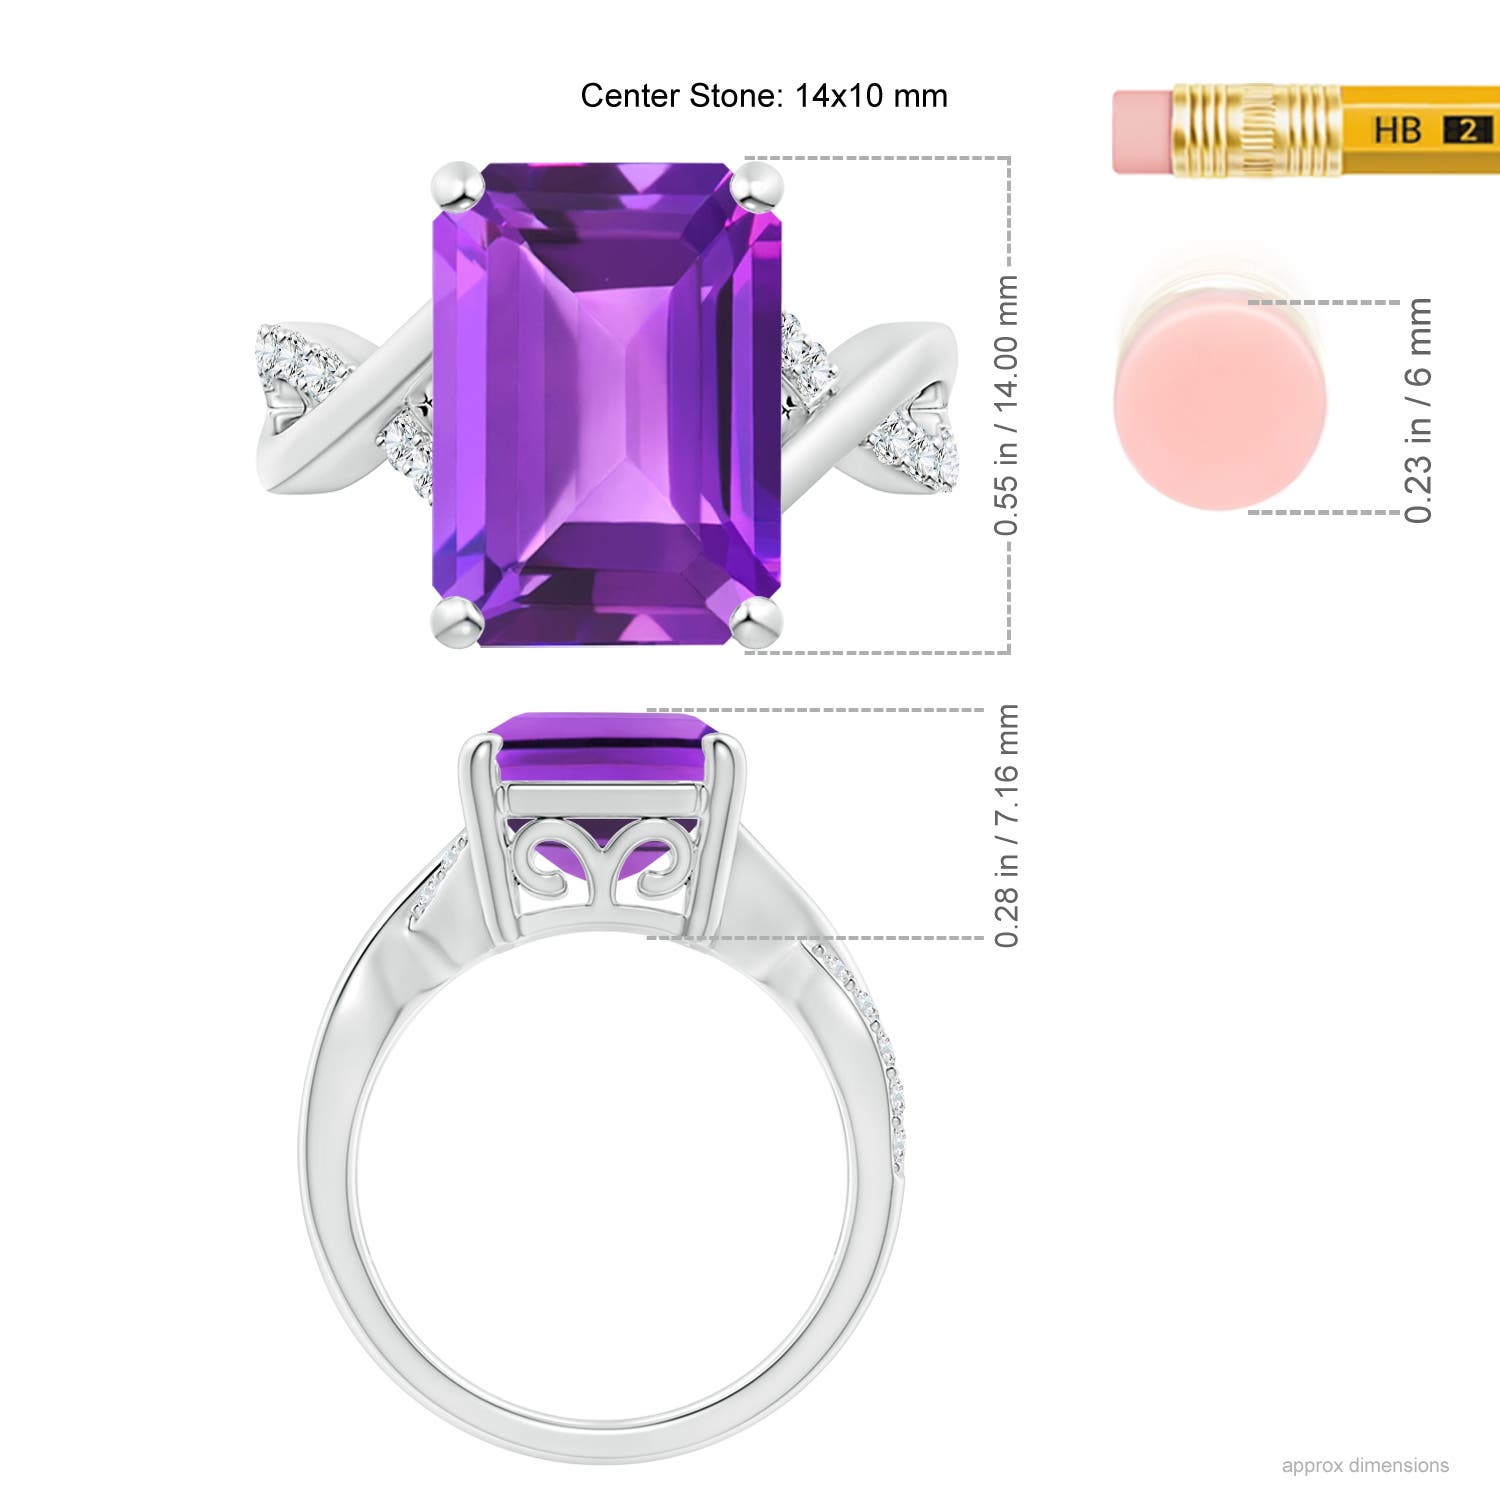 AAA - Amethyst / 6.7 CT / 14 KT White Gold